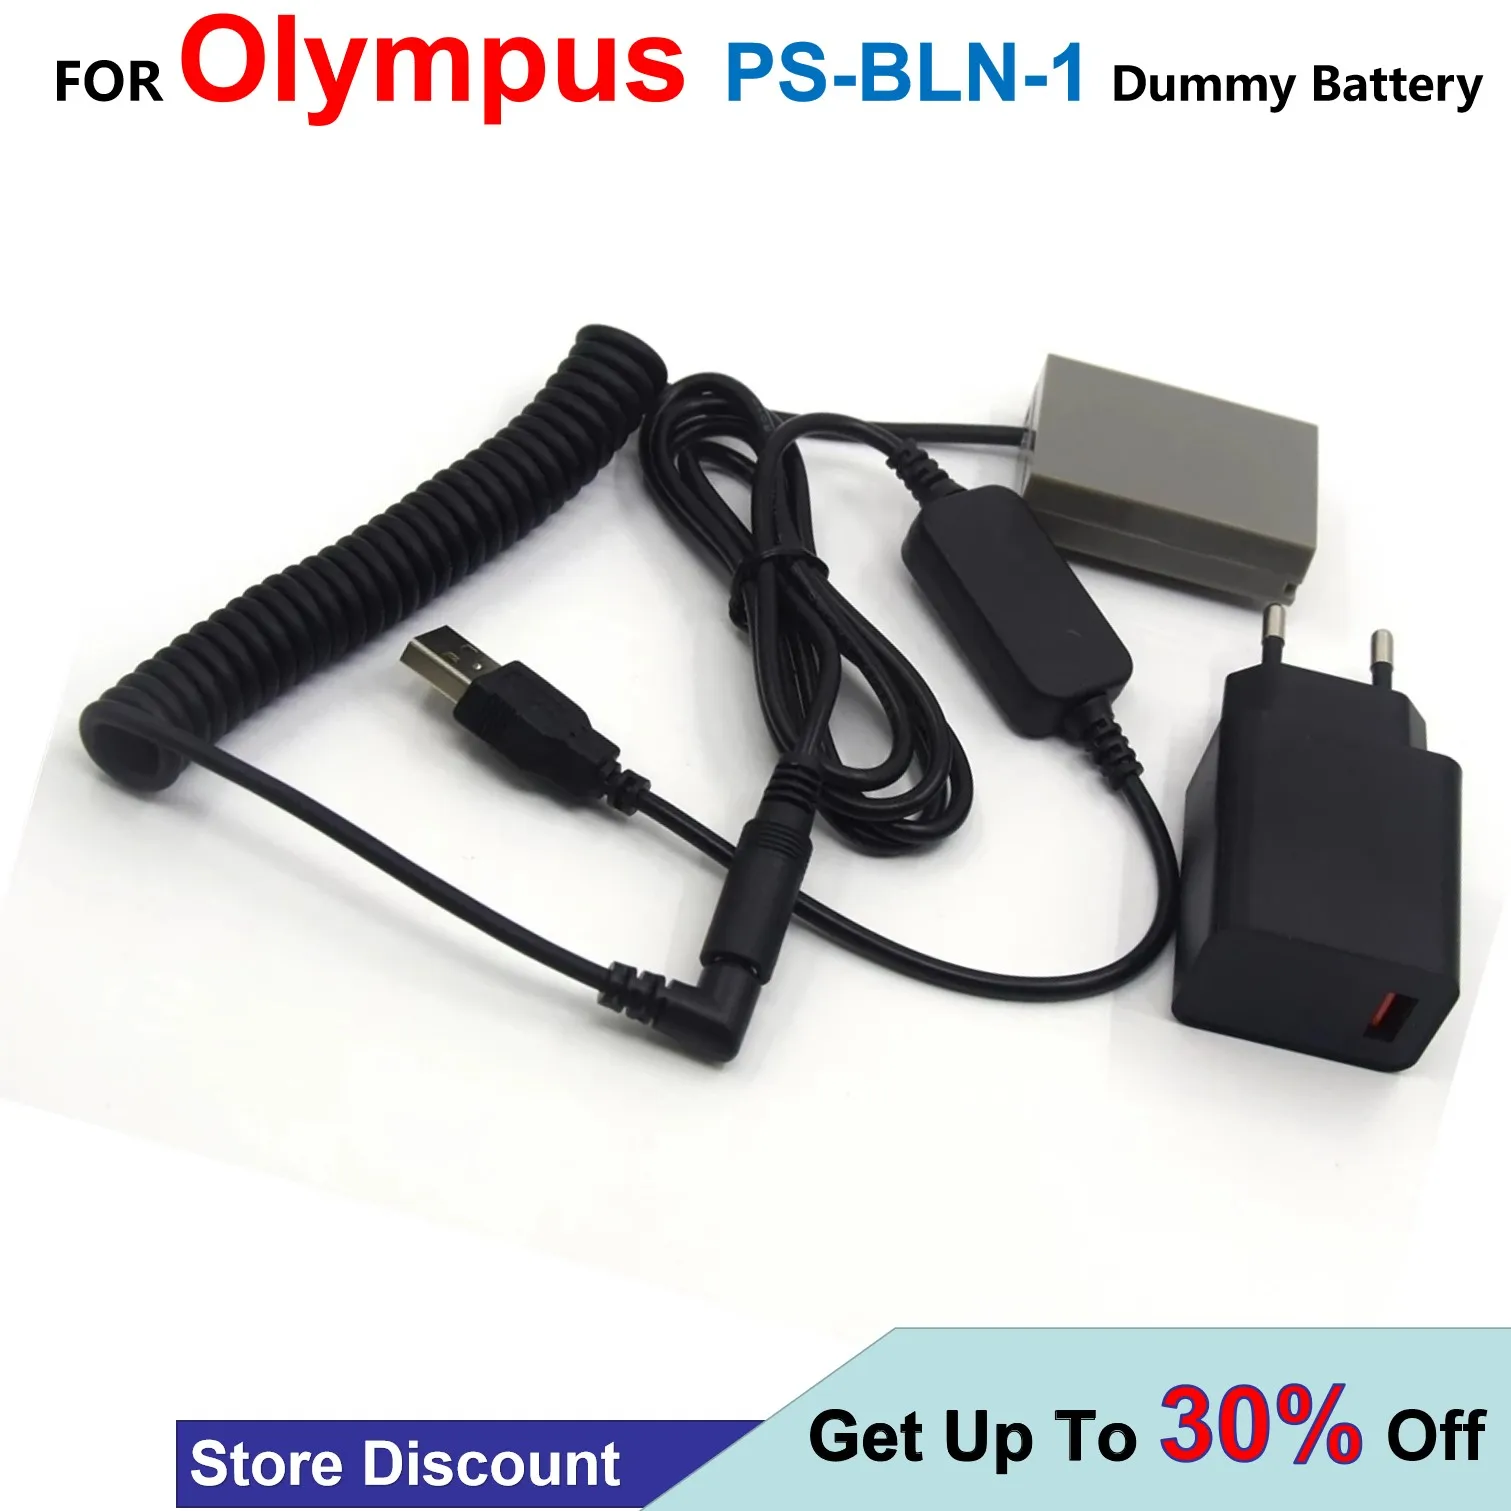 

PS-BLN1 Spring DC Coupler BLN-1 Dummy Battery+Power Bank USB Cable+QC3.0 Adapter For Olympus Camera OM-D E-M5 II 2 E-M1 PEN E-P5